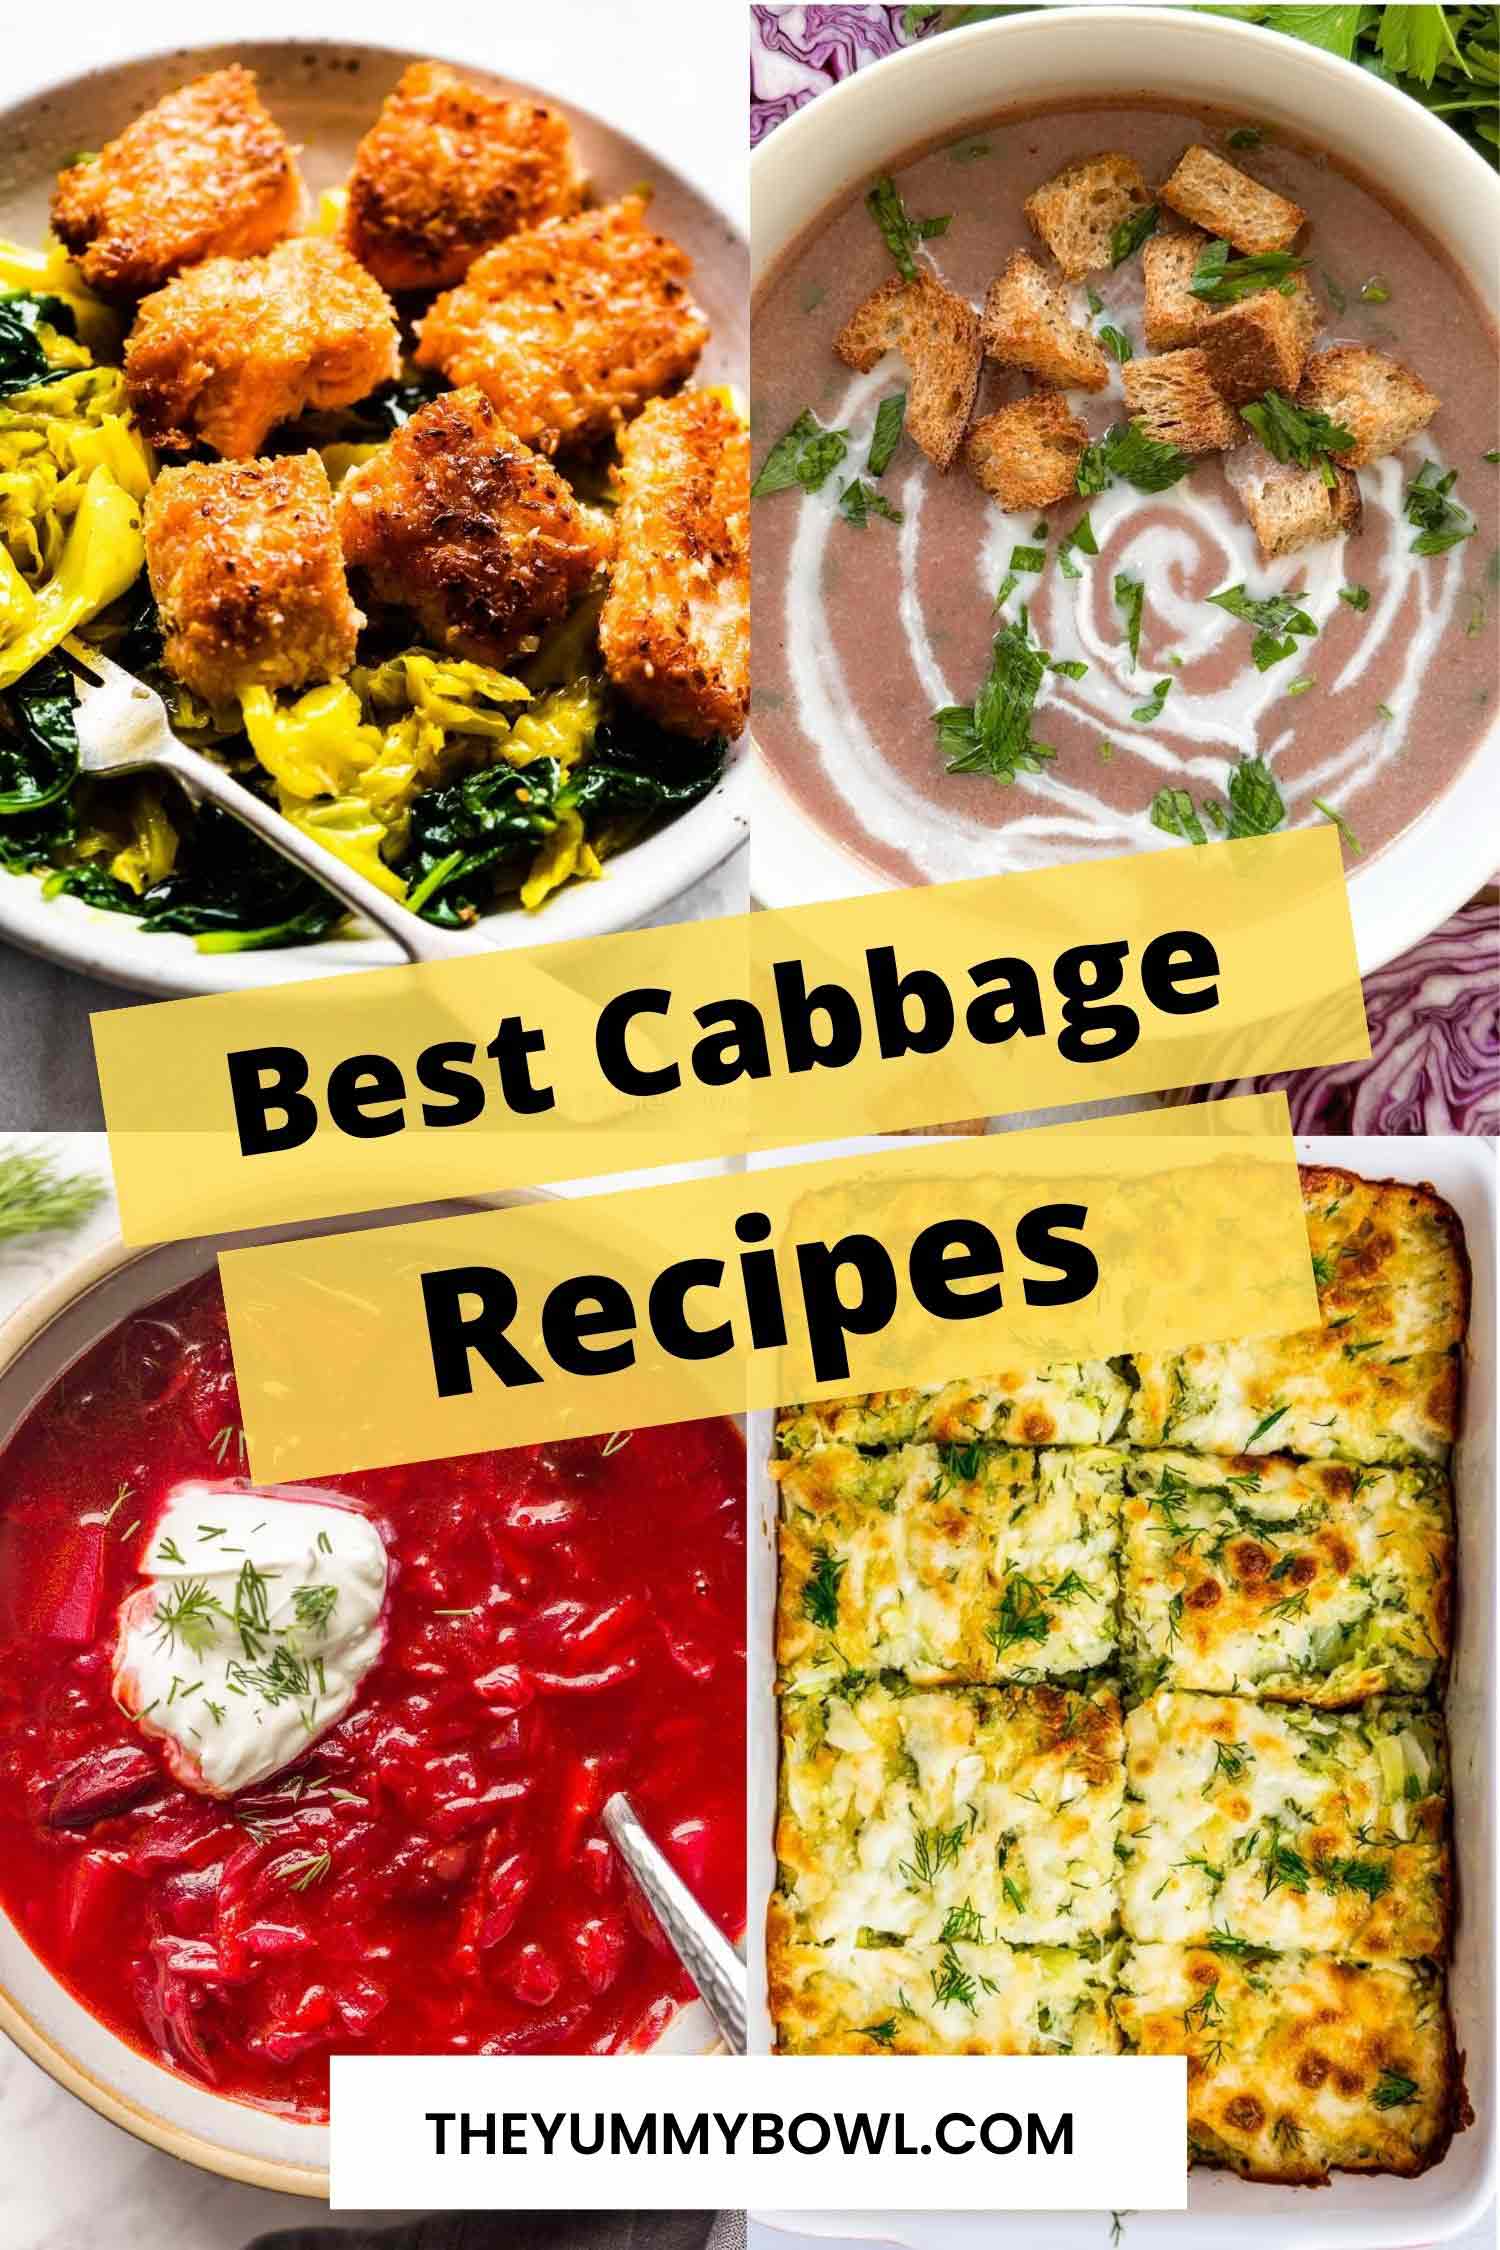 Best Cabbage Recipes Roundup - The Yummy Bowl